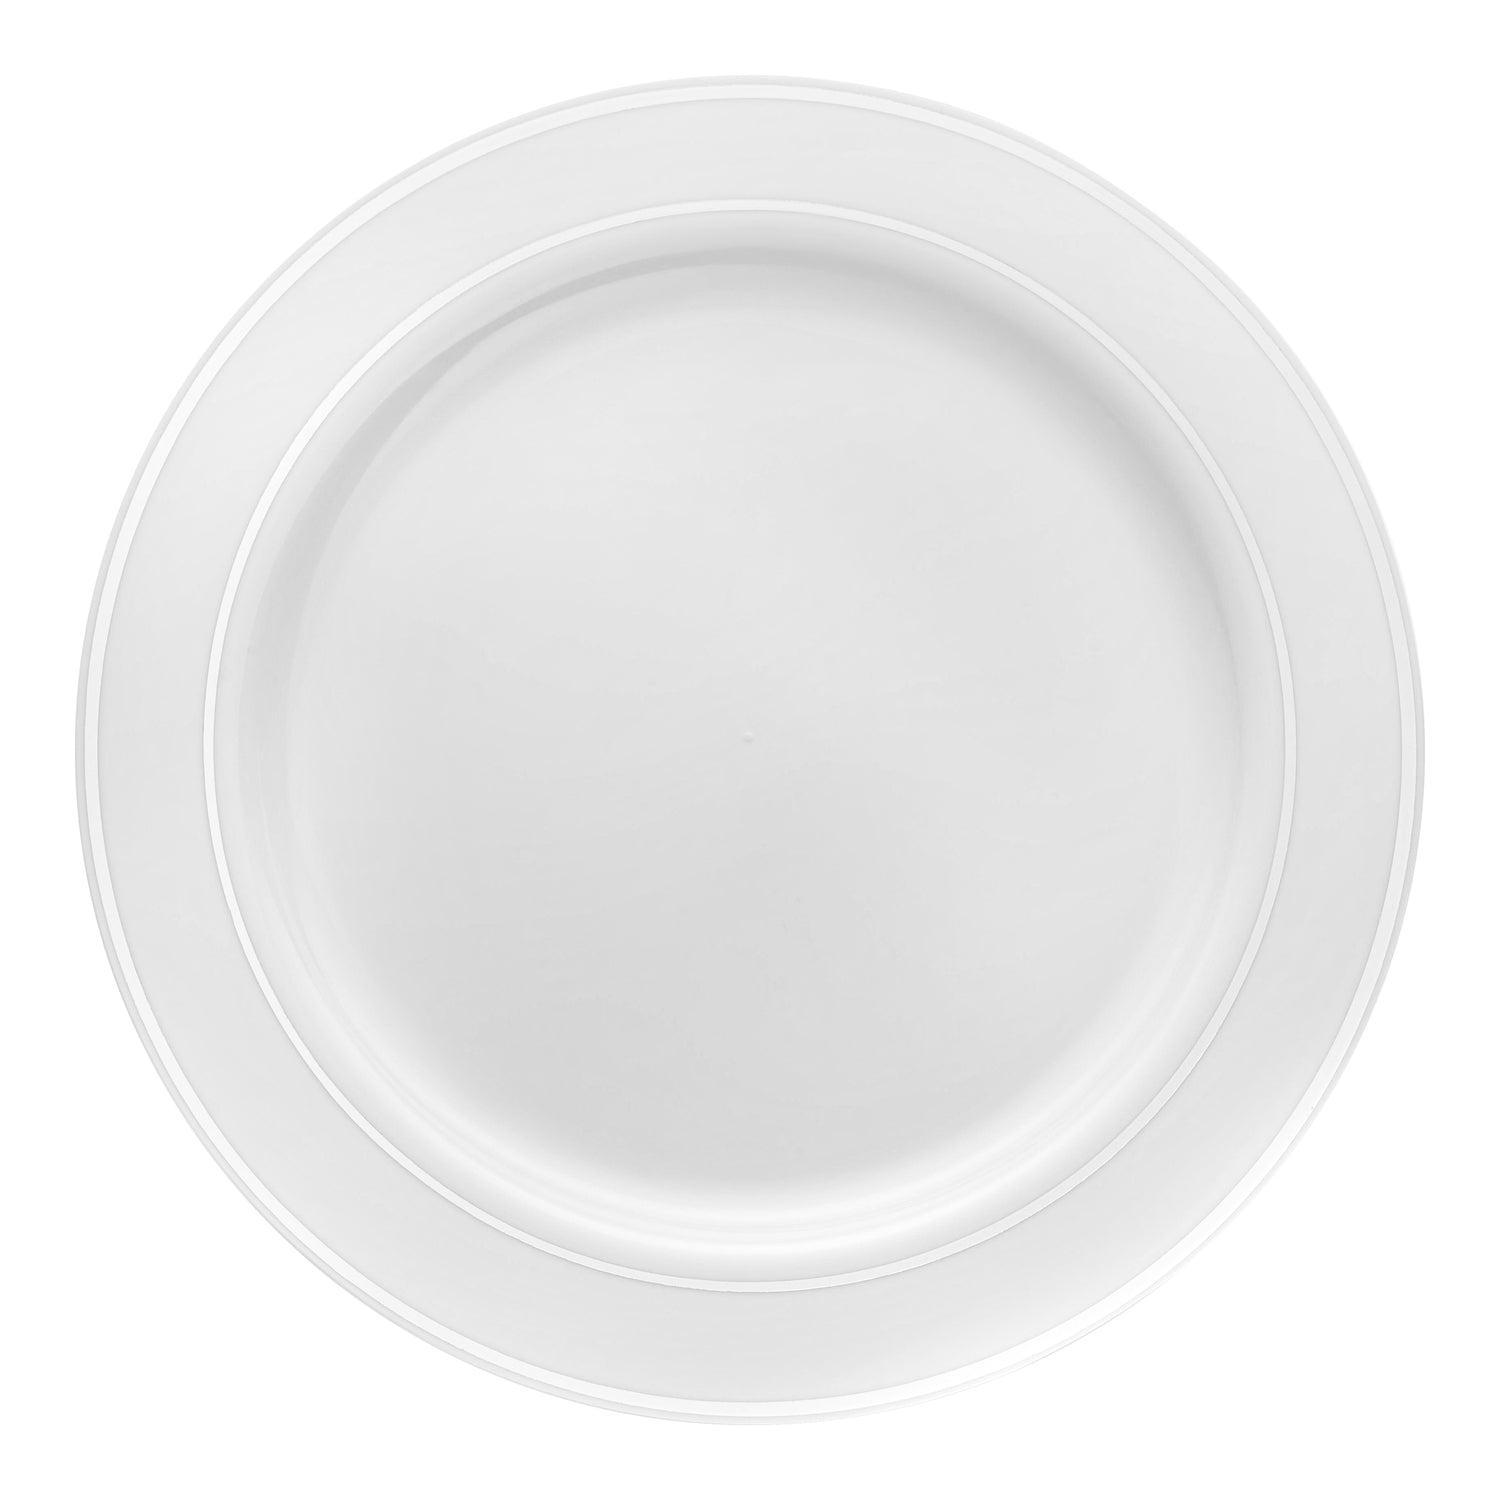 White with Silver Edge Rim Plastic Appetizer/Salad Plates (7.5") | The Kaya Collection